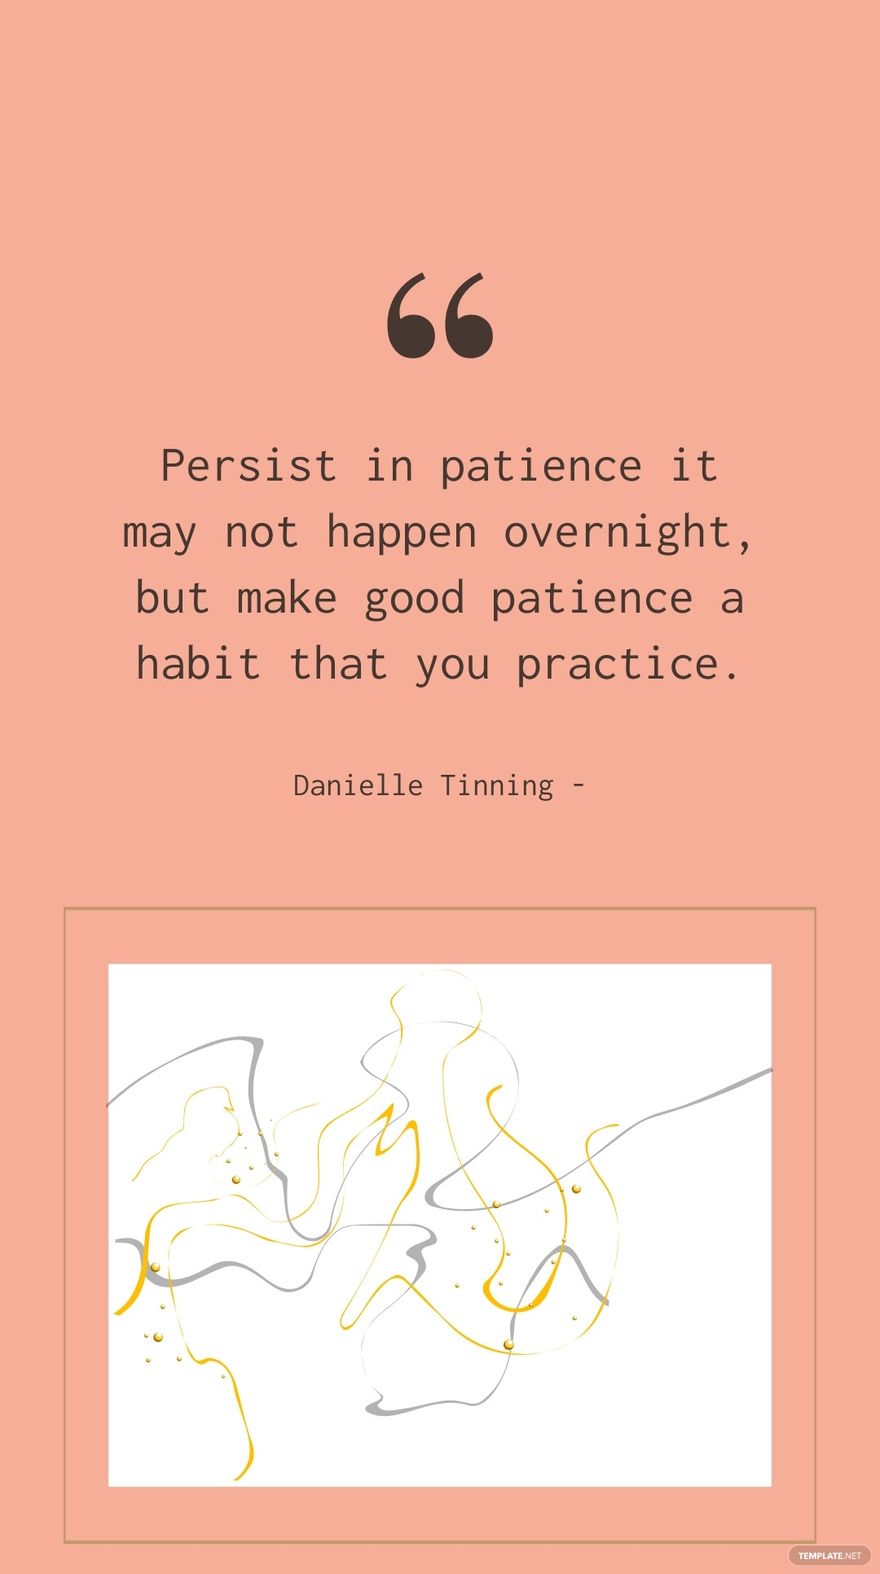 Danielle Tinning - Persist in patience it may not happen overnight, but make good patience a habit that you practice.